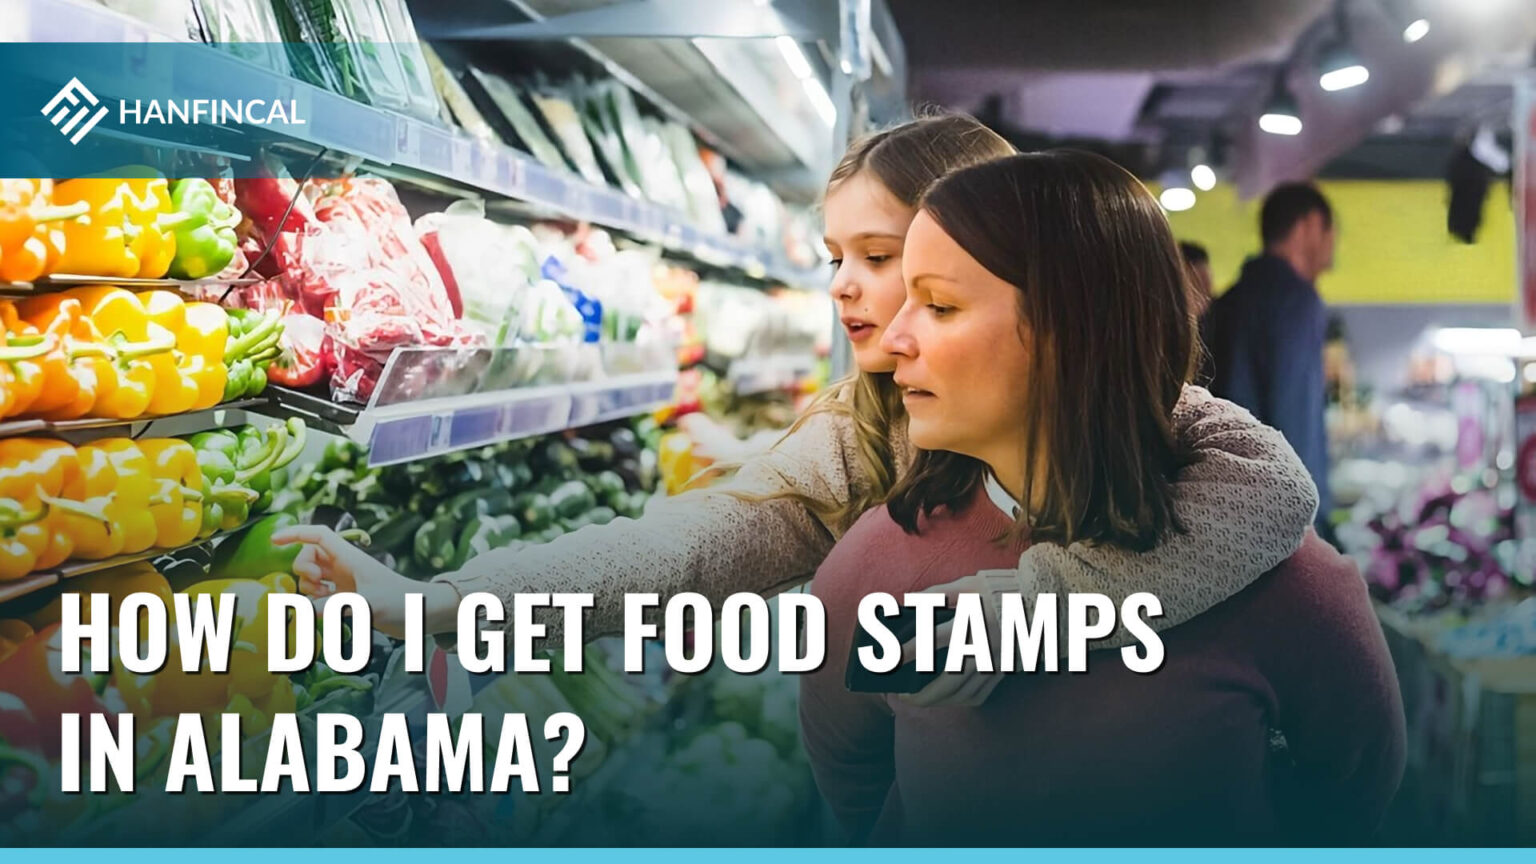 How to apply for Food Stamps in Alabama (02/2023)? Hanfincal